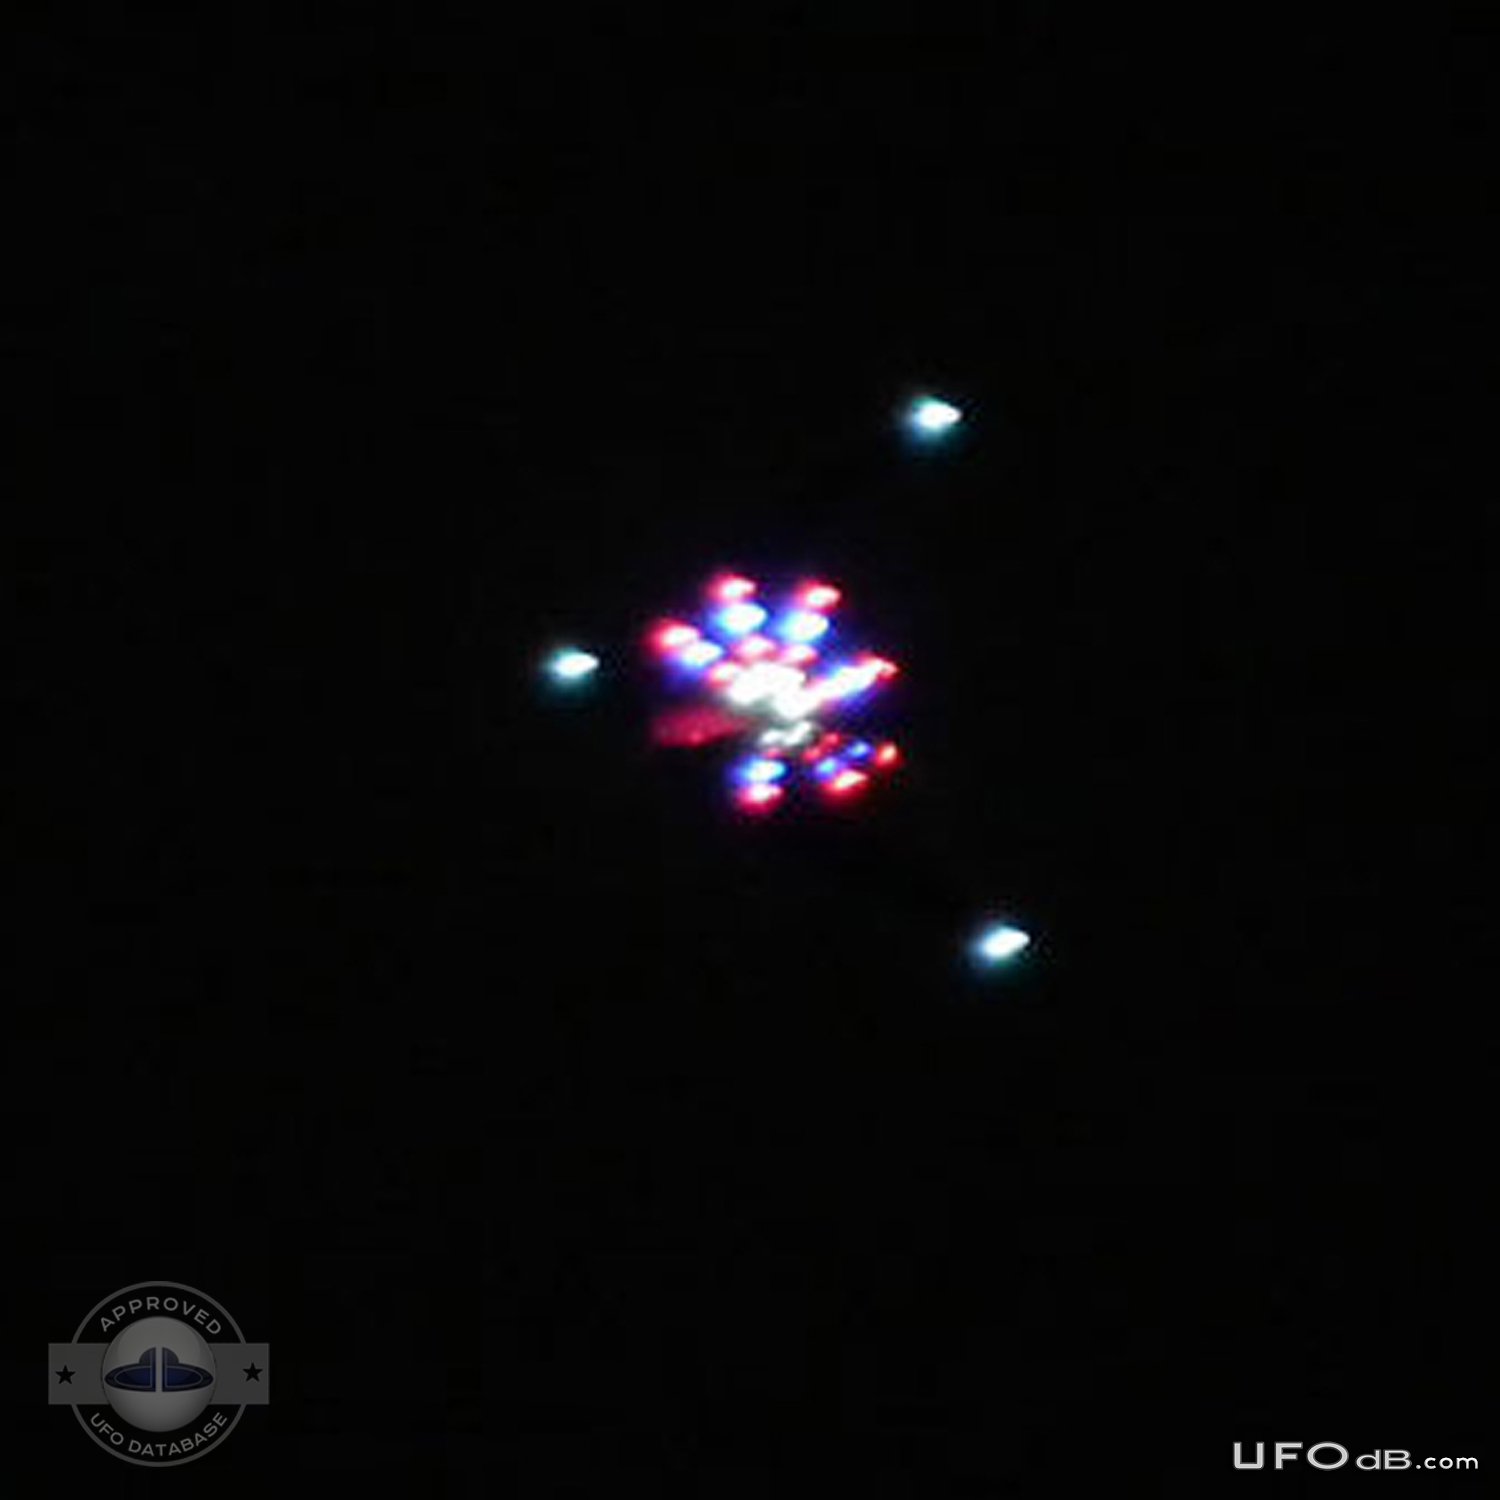 Mr. Shaw photograph a Triangular UFO formation - China - April 30 2011 UFO Picture #281-2